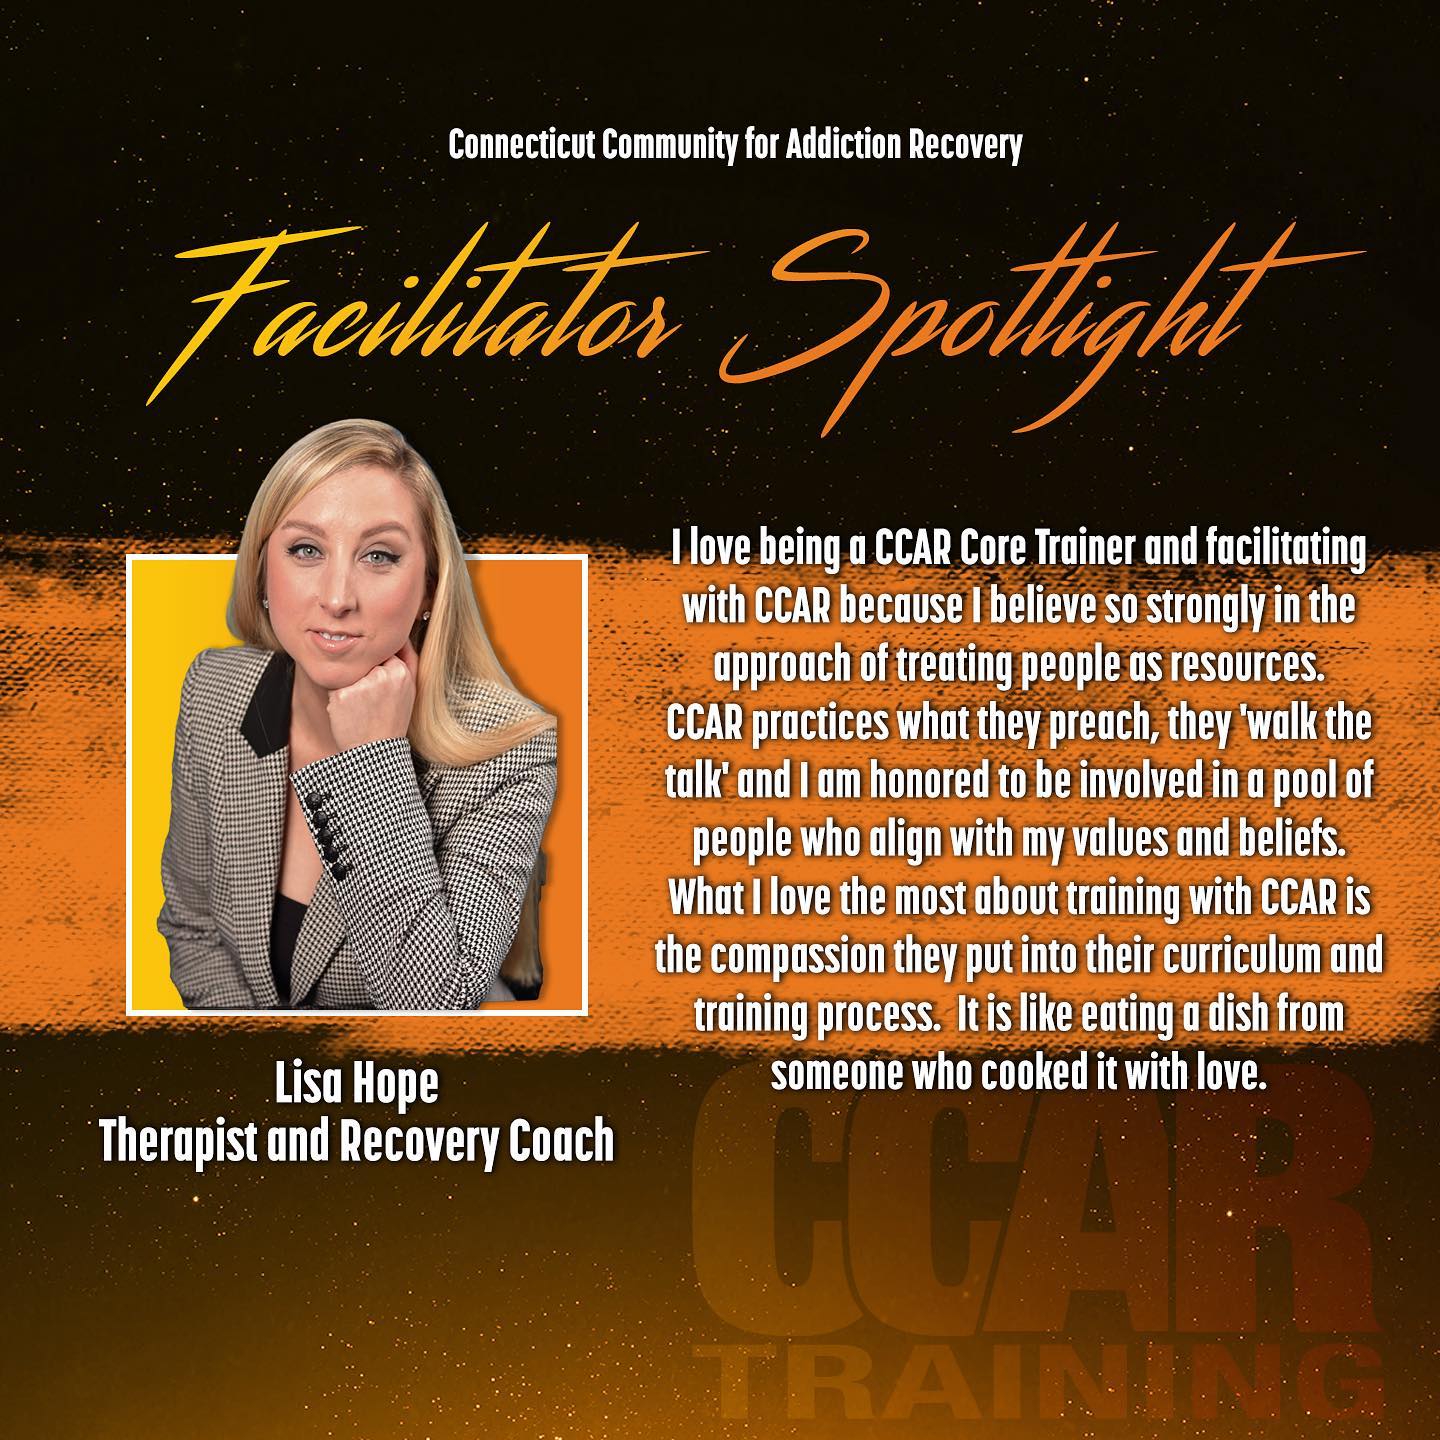 This week we are spotlighting Lisa Hope! Lisa is an art therapist, a recovery coach, and one of our core trainers. Lisa, thank you for everything you do! 🙏🏻🙌🏻👏🏻

#recovery #recoverycoach #recoverycoaching #recoveryispossible #recoverycoachingworks #recoverymatters #virtuallearning #onlinetraining #trainer #facilitator #peersupport #webinar #webinars #wecanrecover #recoveryjourney